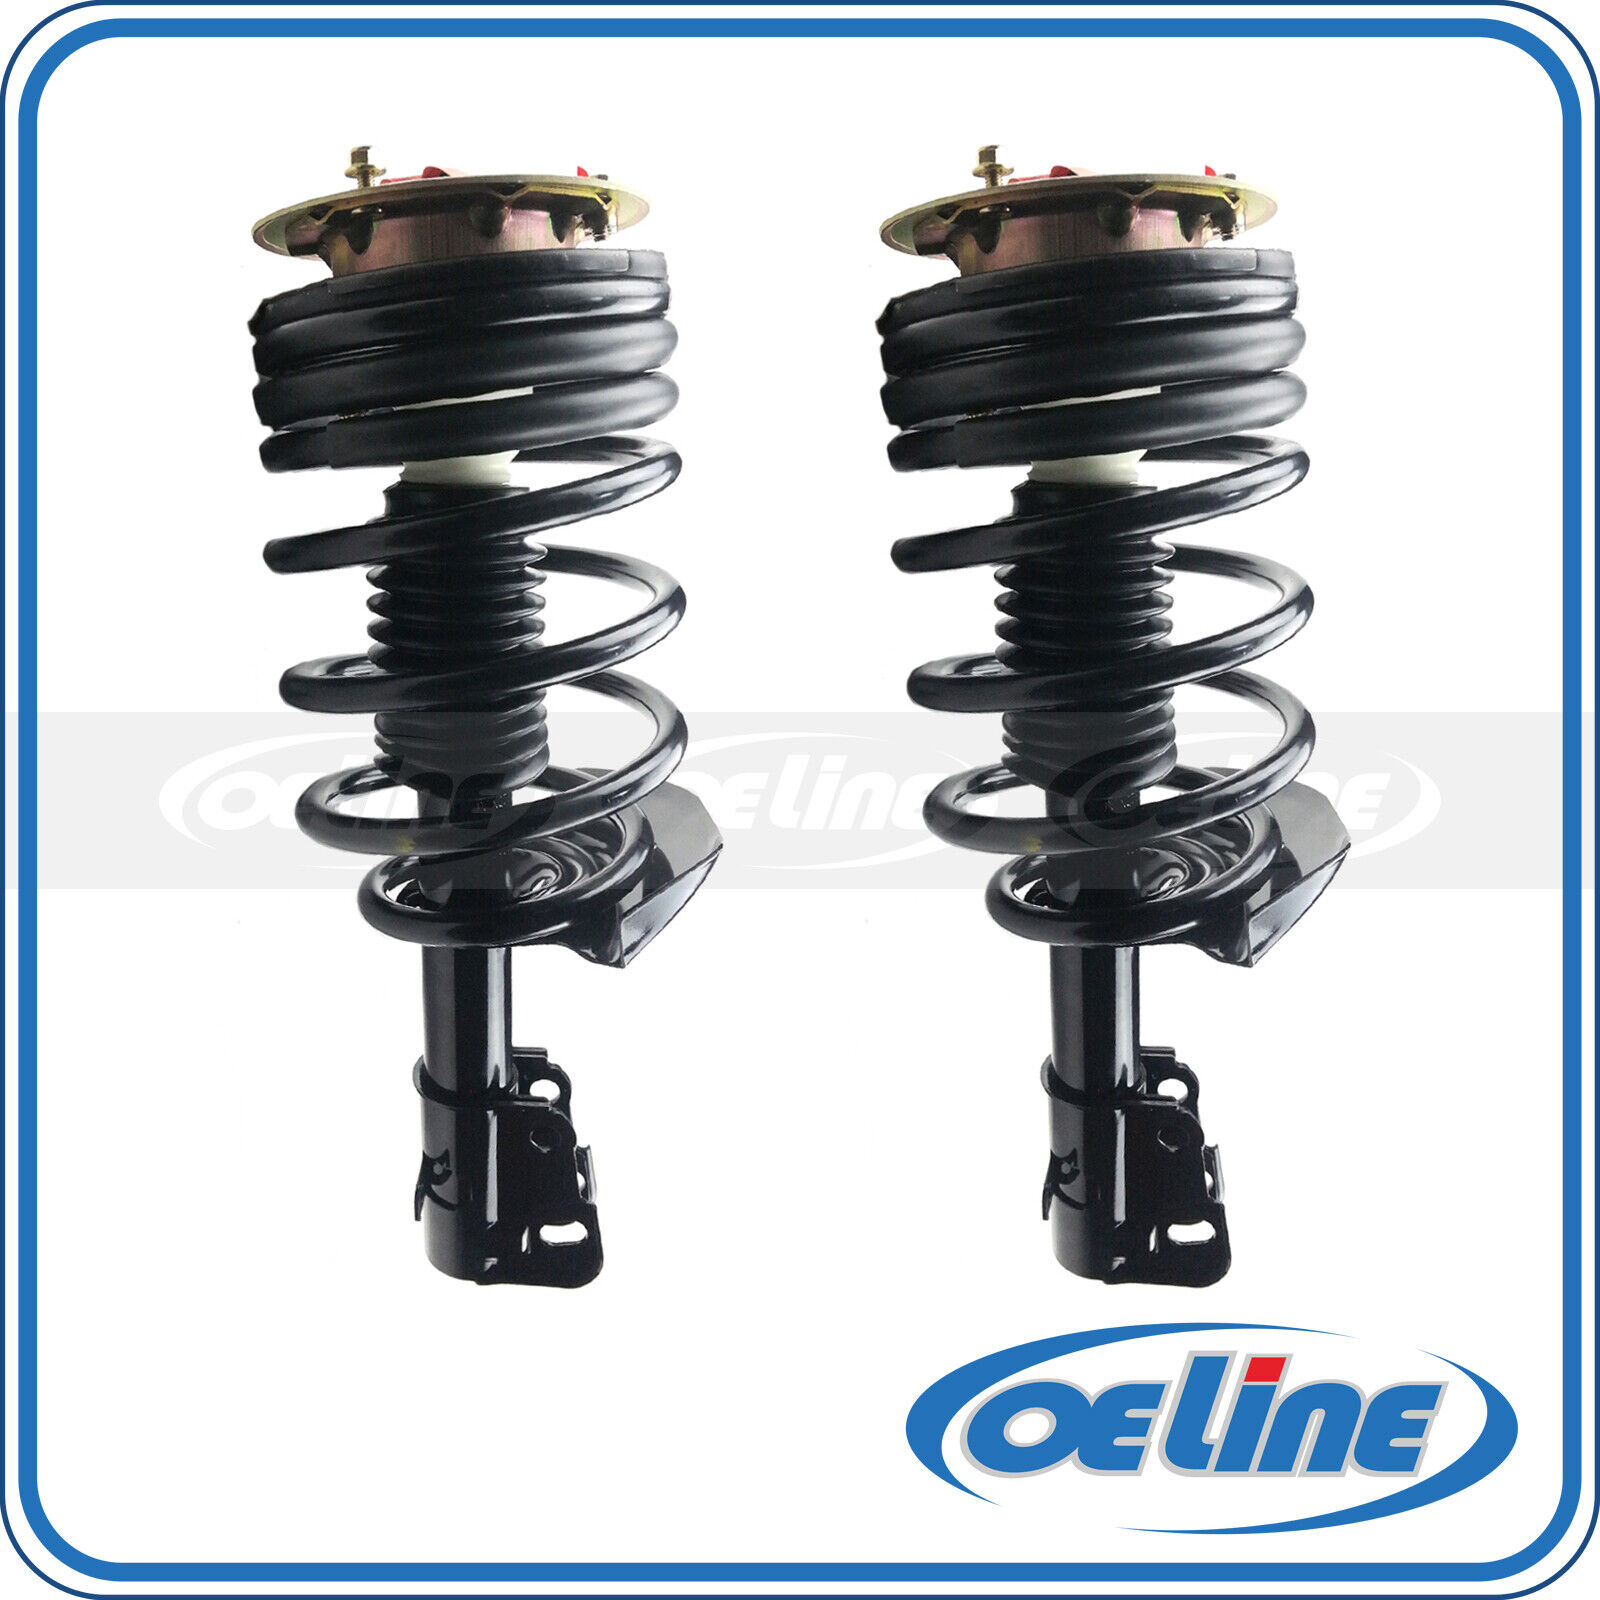 2x Front Complete Struts & Coil Springs w/ Mounts for 90-96 Chevrolet Lumina APV